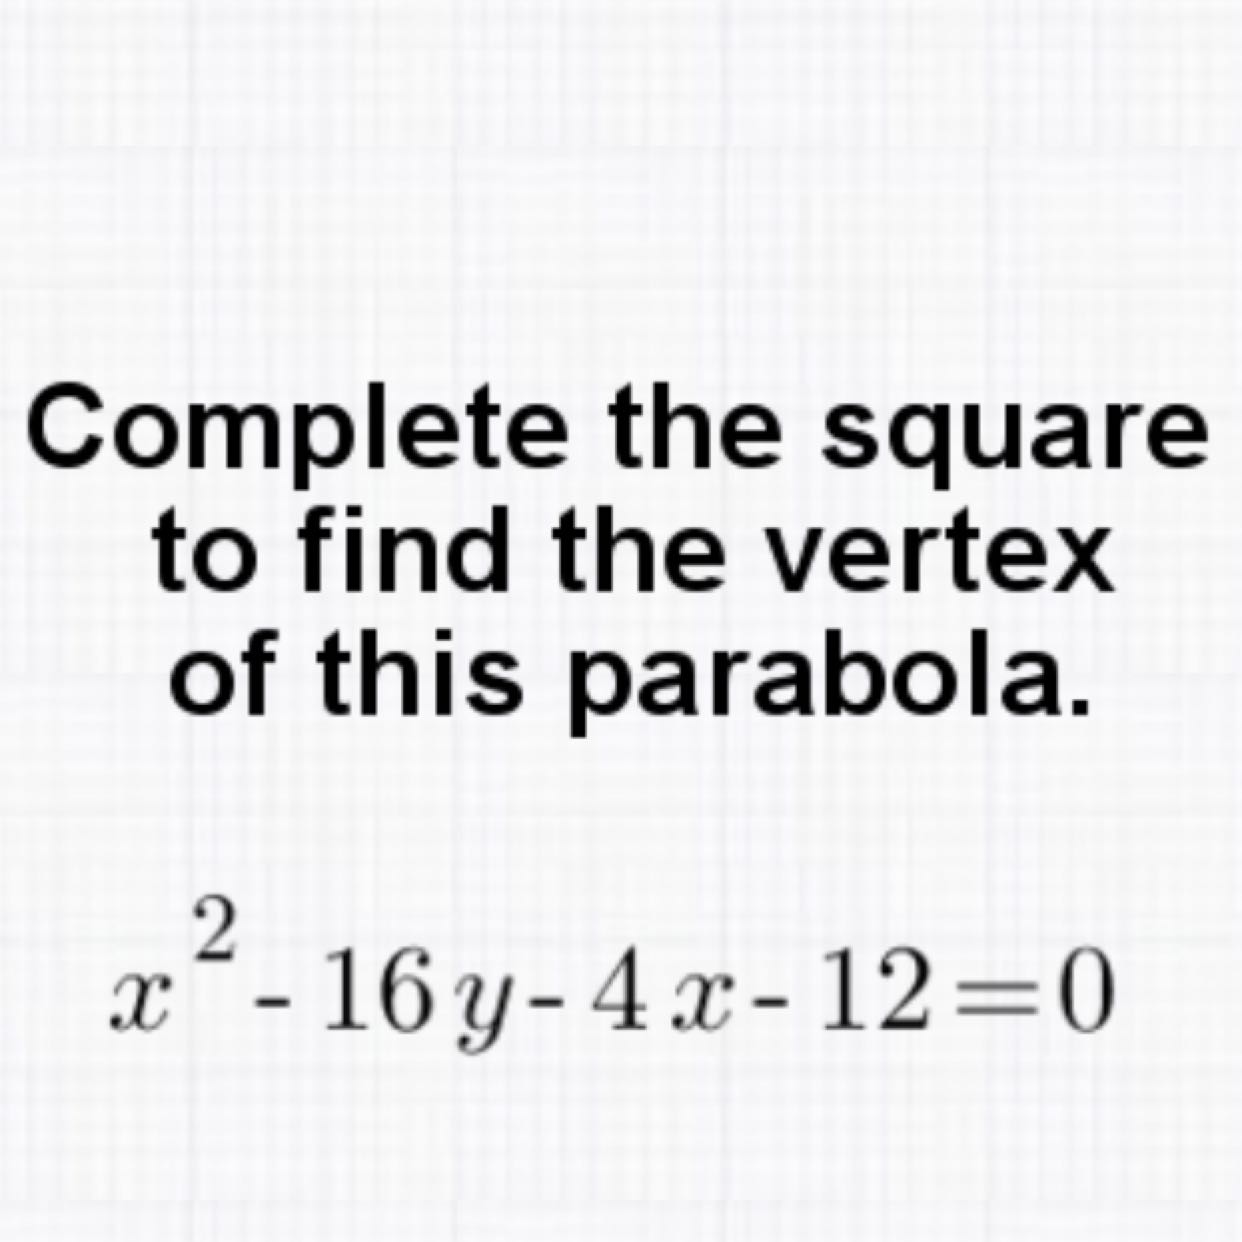 Complete the square to find the vertex of this parabola.
\[
x^{2}-16 y-4 x-12=0
\]